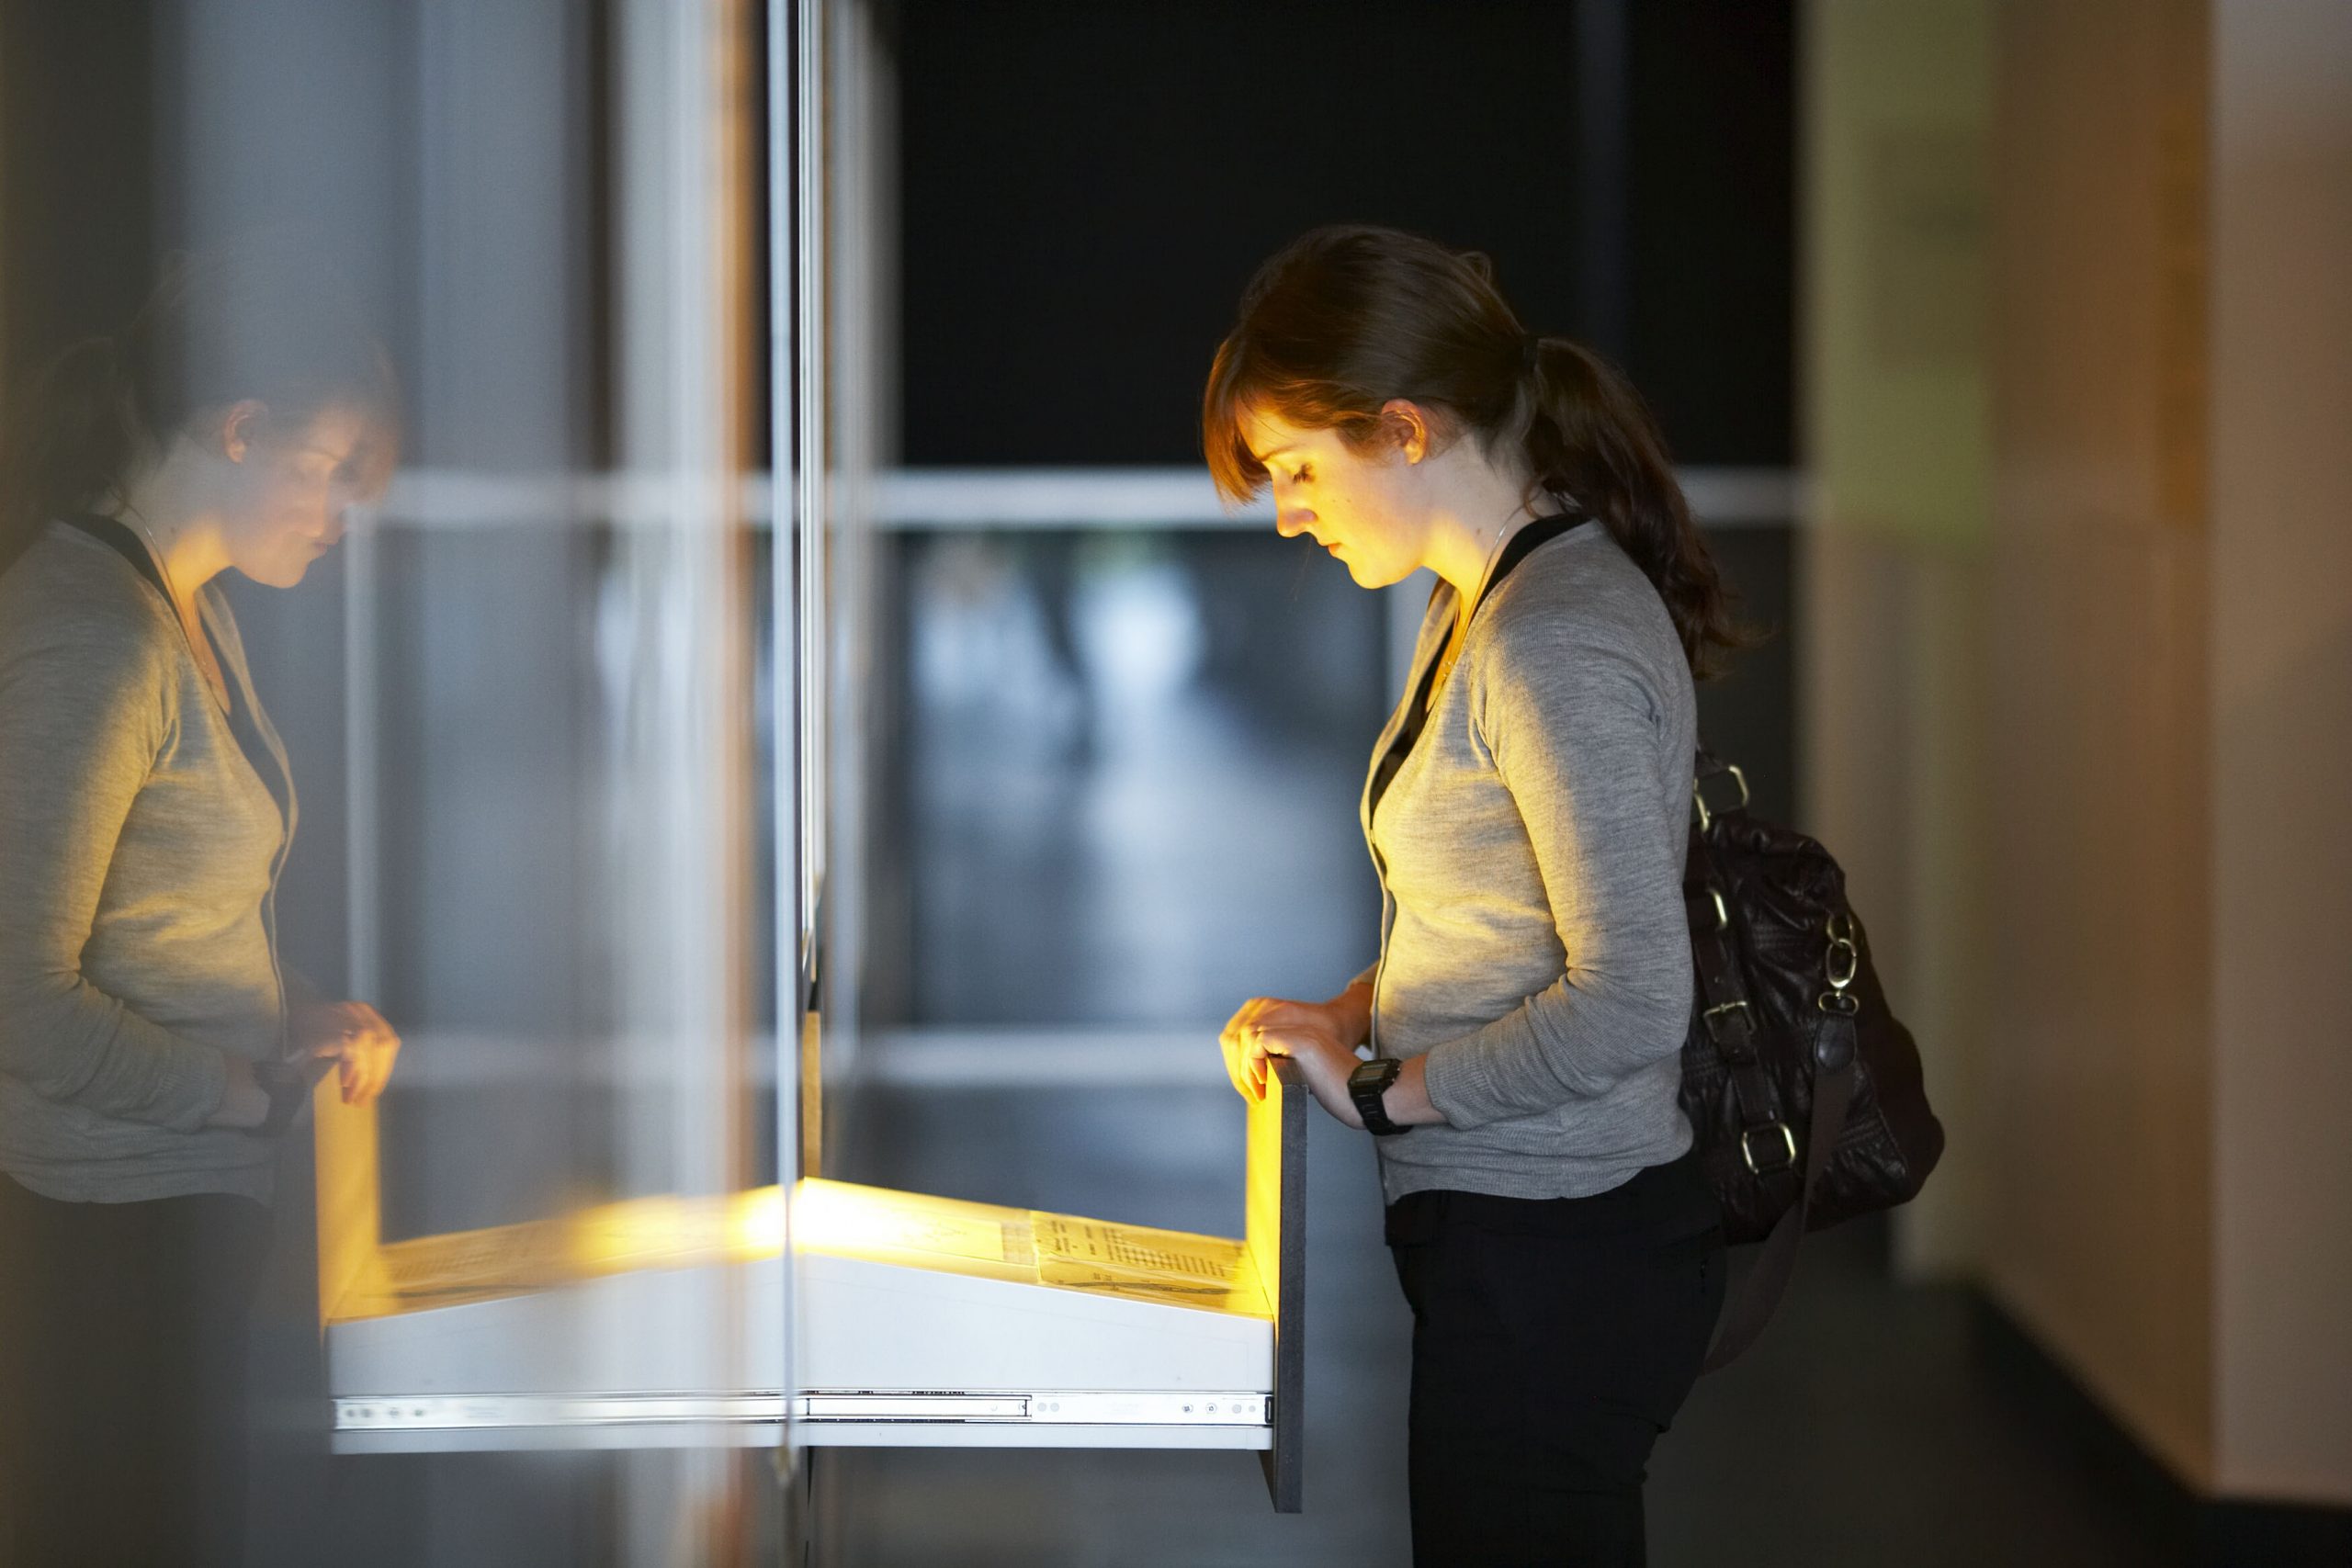 A young woman is illuminated with a warm glow from a display in an open drawer that she is looking at.